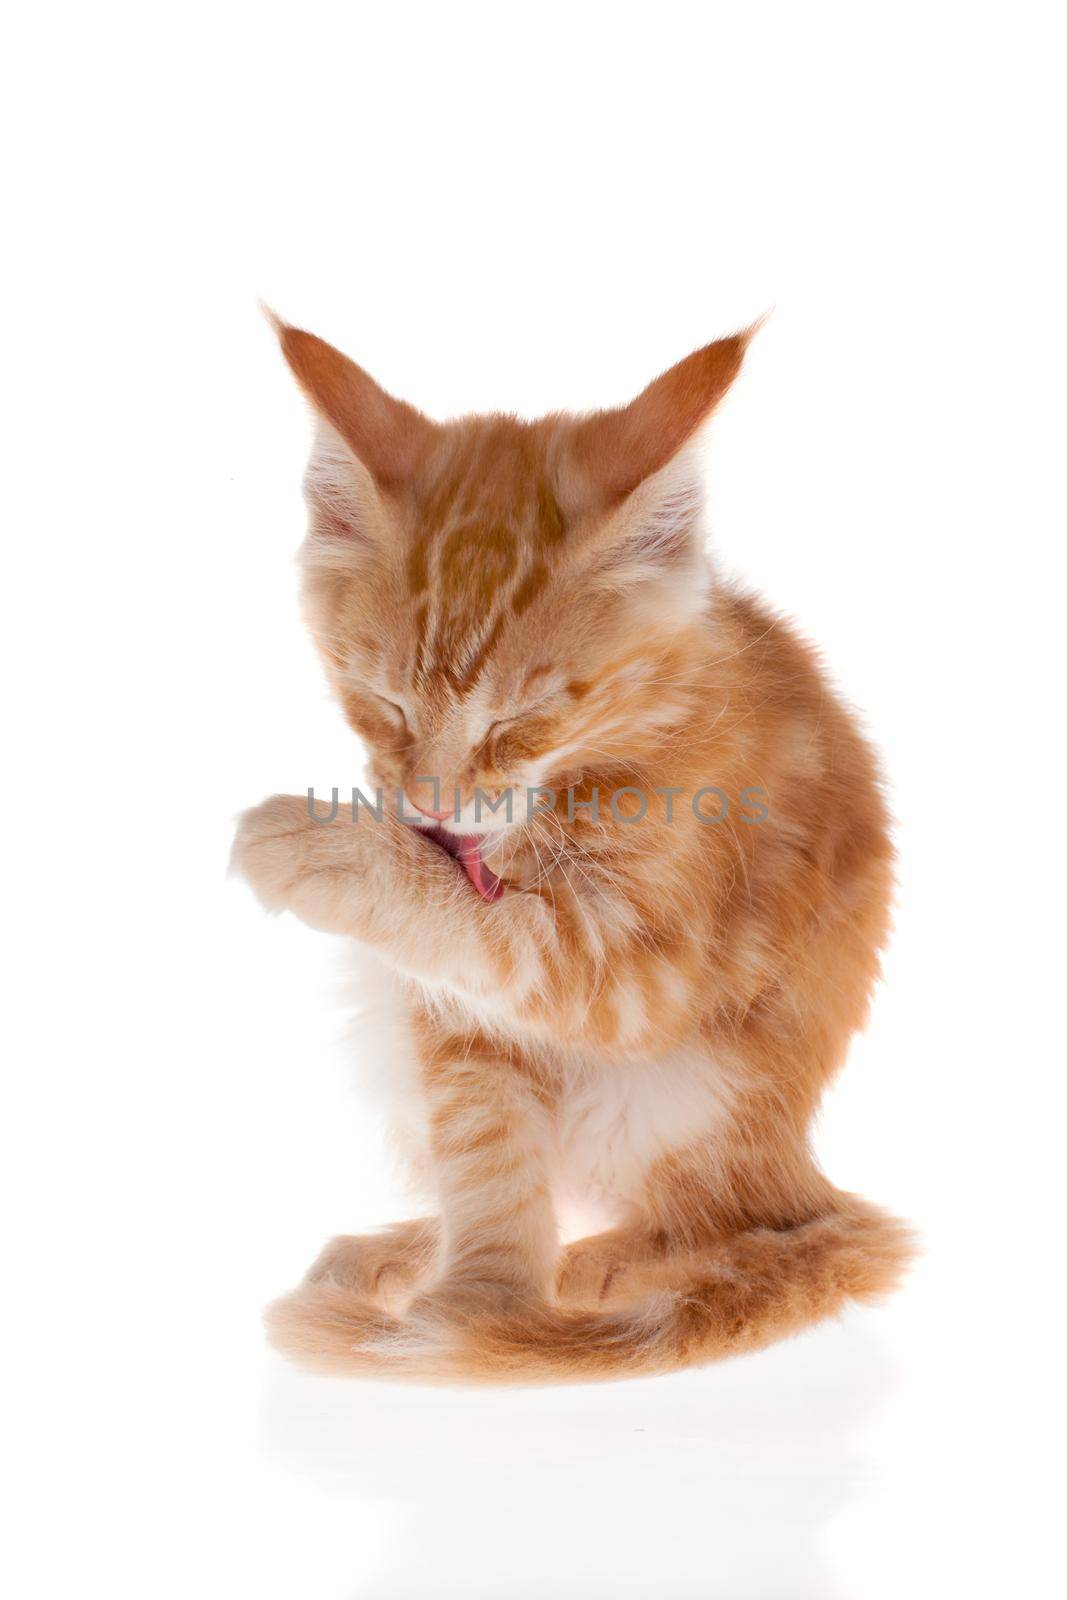 Red Maine Coon cat isoated on white by RosaJay